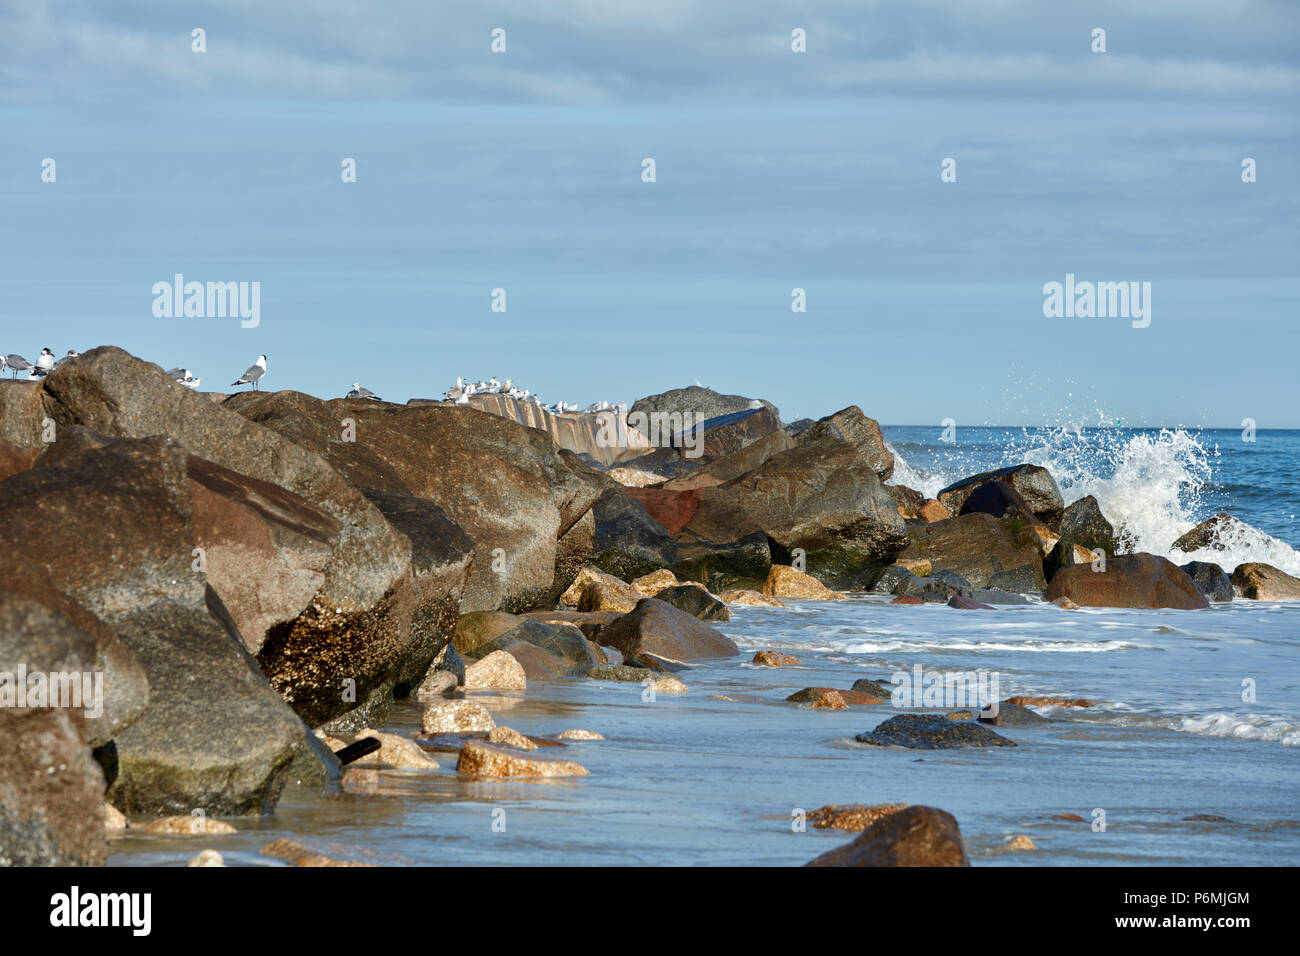 Seabirds lined up on a breakwall with a wave breaking over the rocks Stock Photo